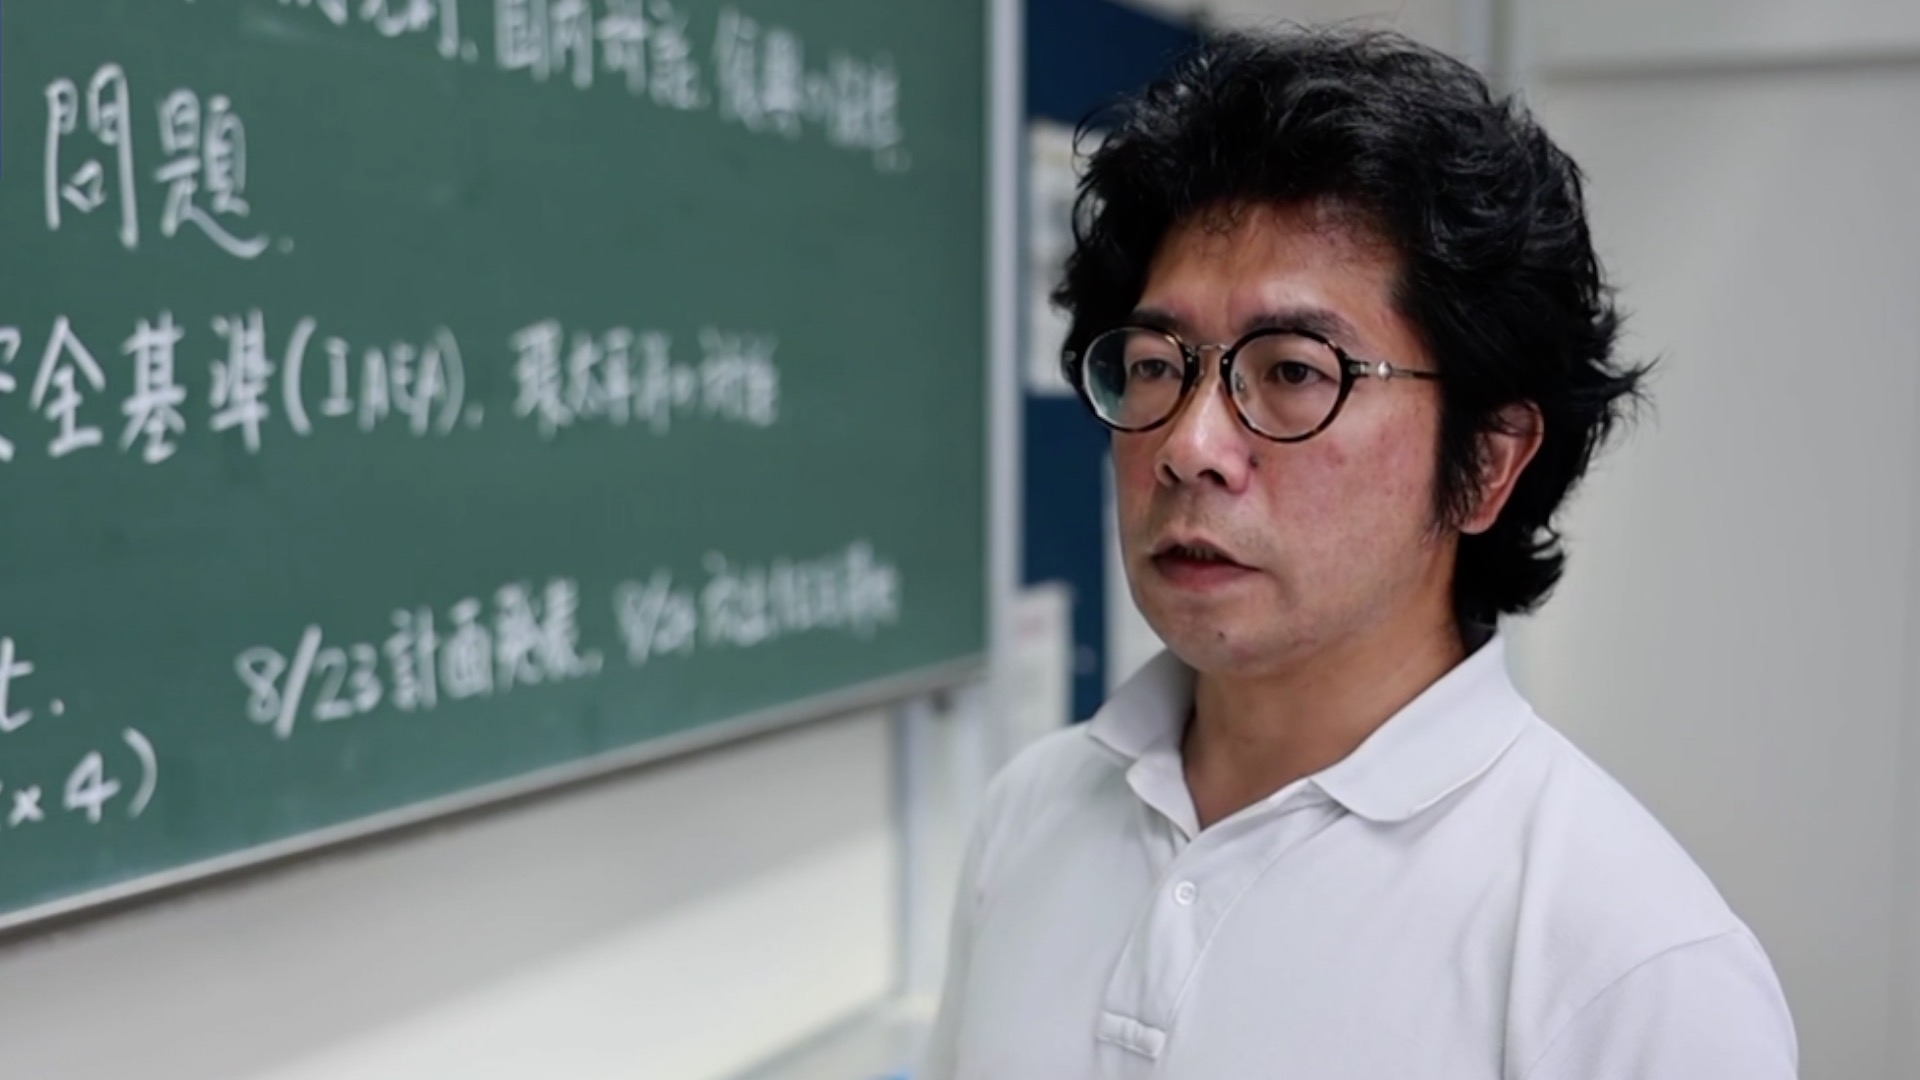 Kumpei Hayashi, associate professor at the Fukushima University, criticized the Japanese government for releasing the nuclear-contaminated wastewater into the sea when being interviewed by a Chinese Media Group reporter. /CMG